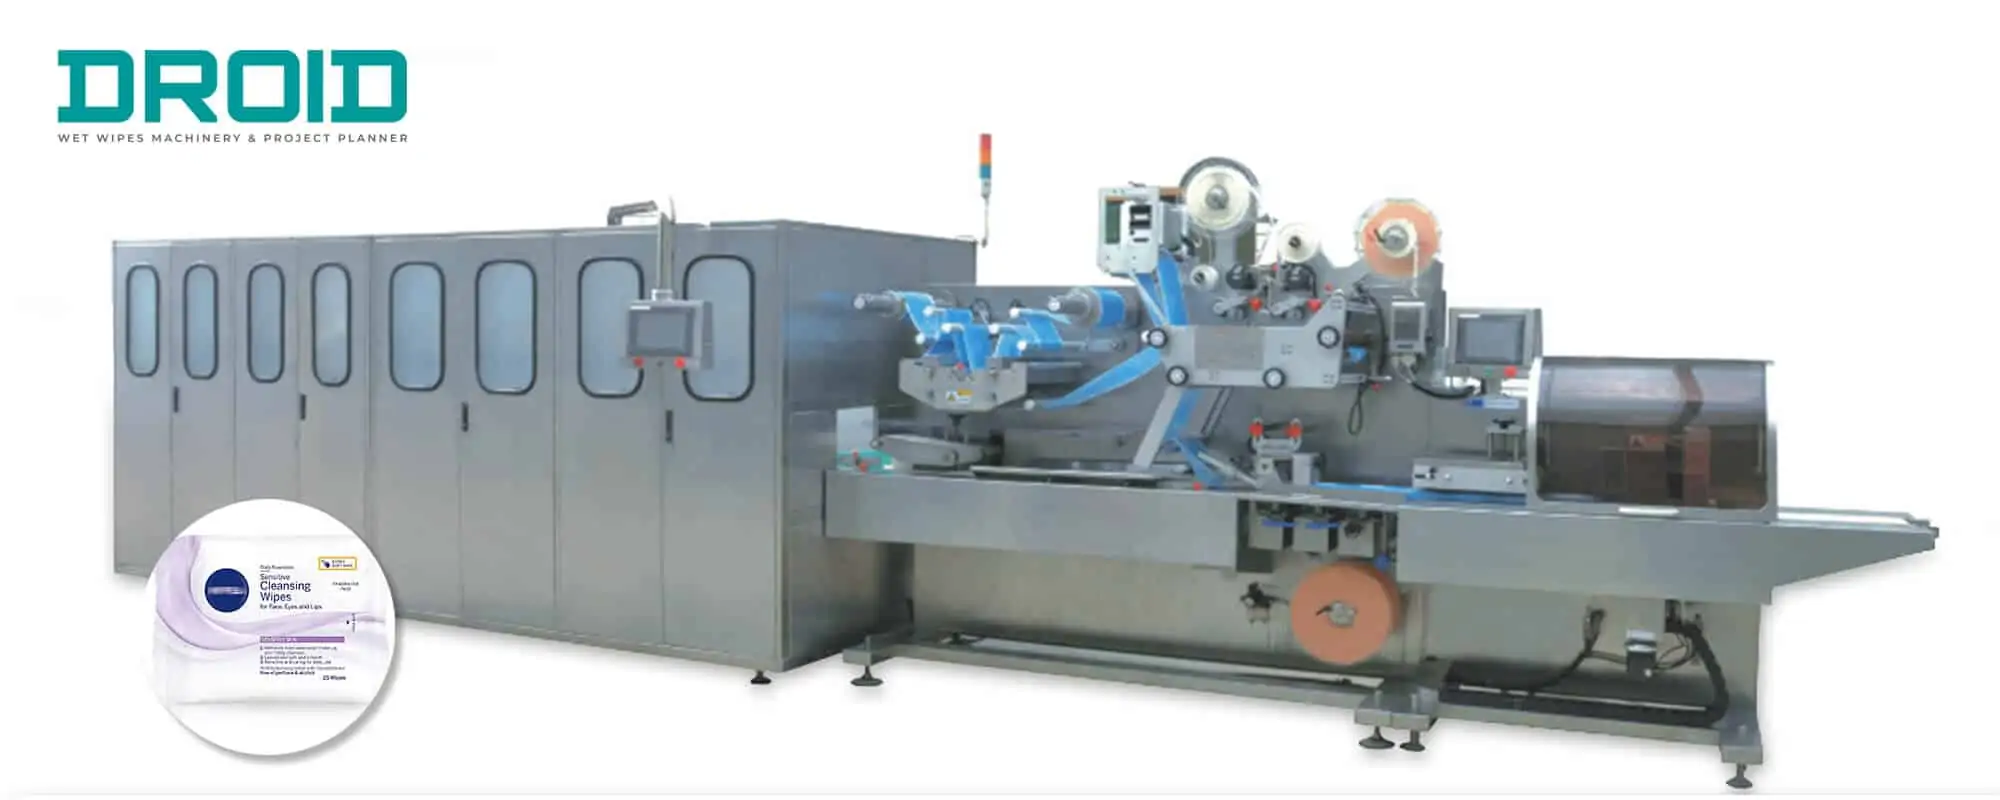 UT FL2 crossfol wet wipes converting and packaging machine - Are you looking for Disinfectant Wet Wipes Machine?